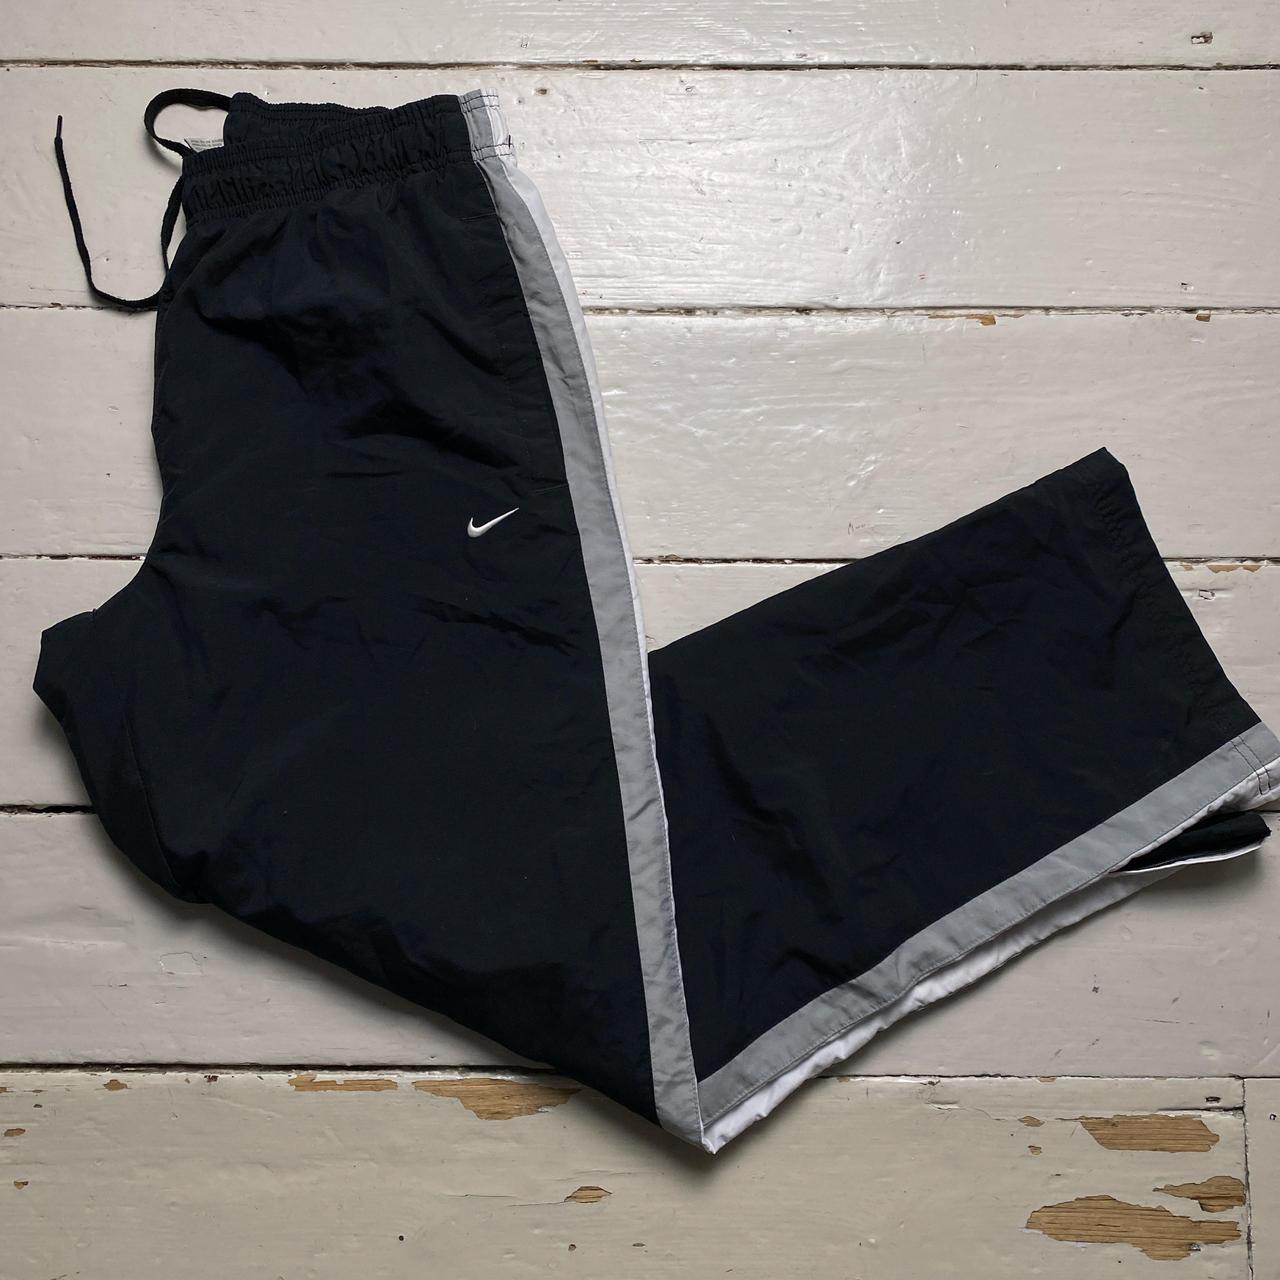 Nike Athletic Department Swoosh Vintage Black Grey and White Strip Shell Track Pant Baggy Bottoms